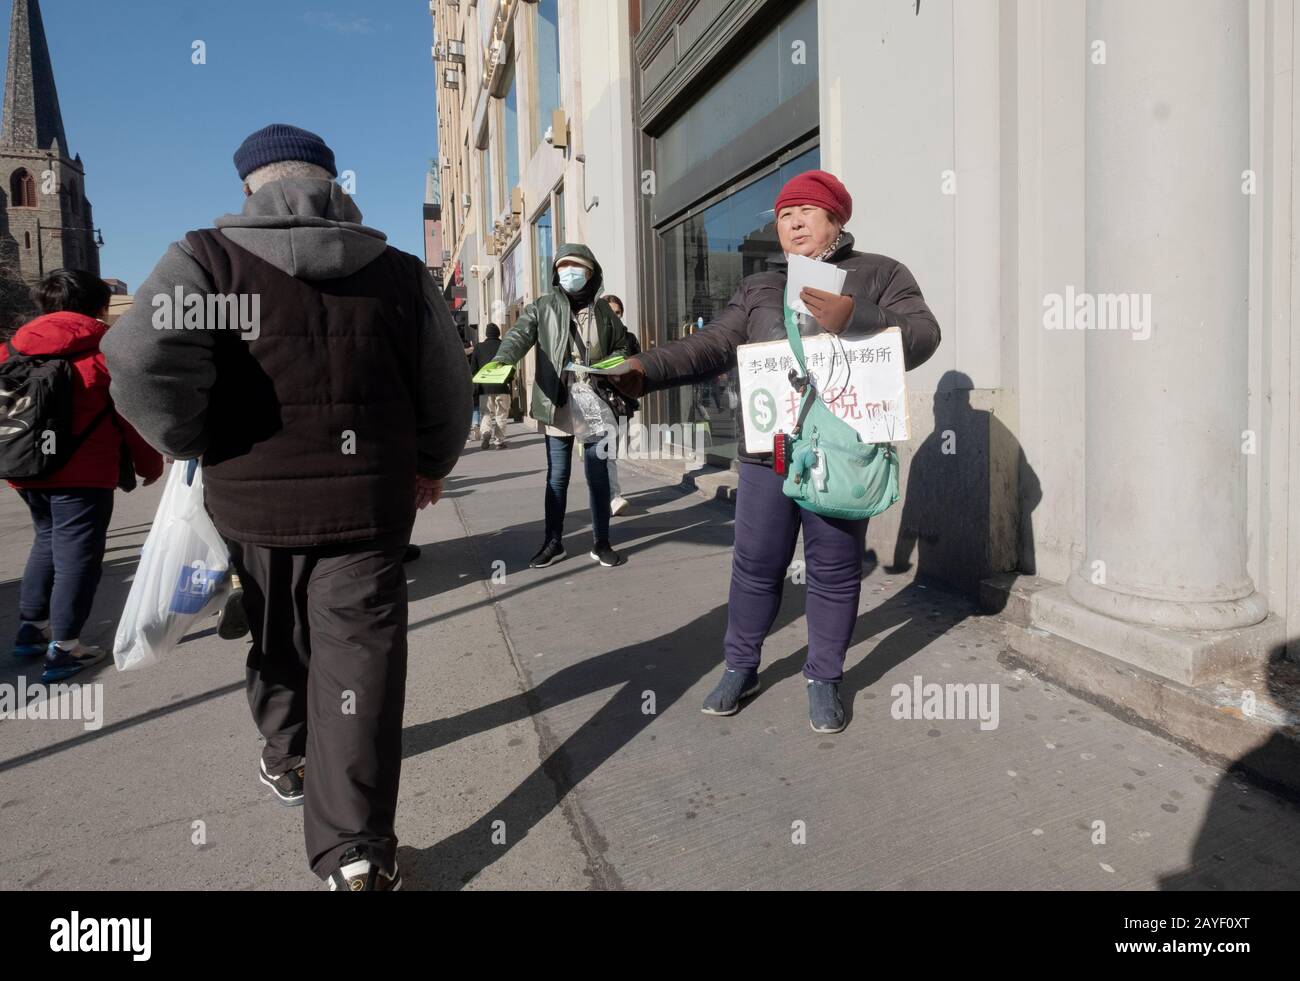 On a cold day, Chinese American women hand out Chinese language advertising flyers on Main Street off  Roosevelt Ave. in Chinatown, Flushing, NYC Stock Photo